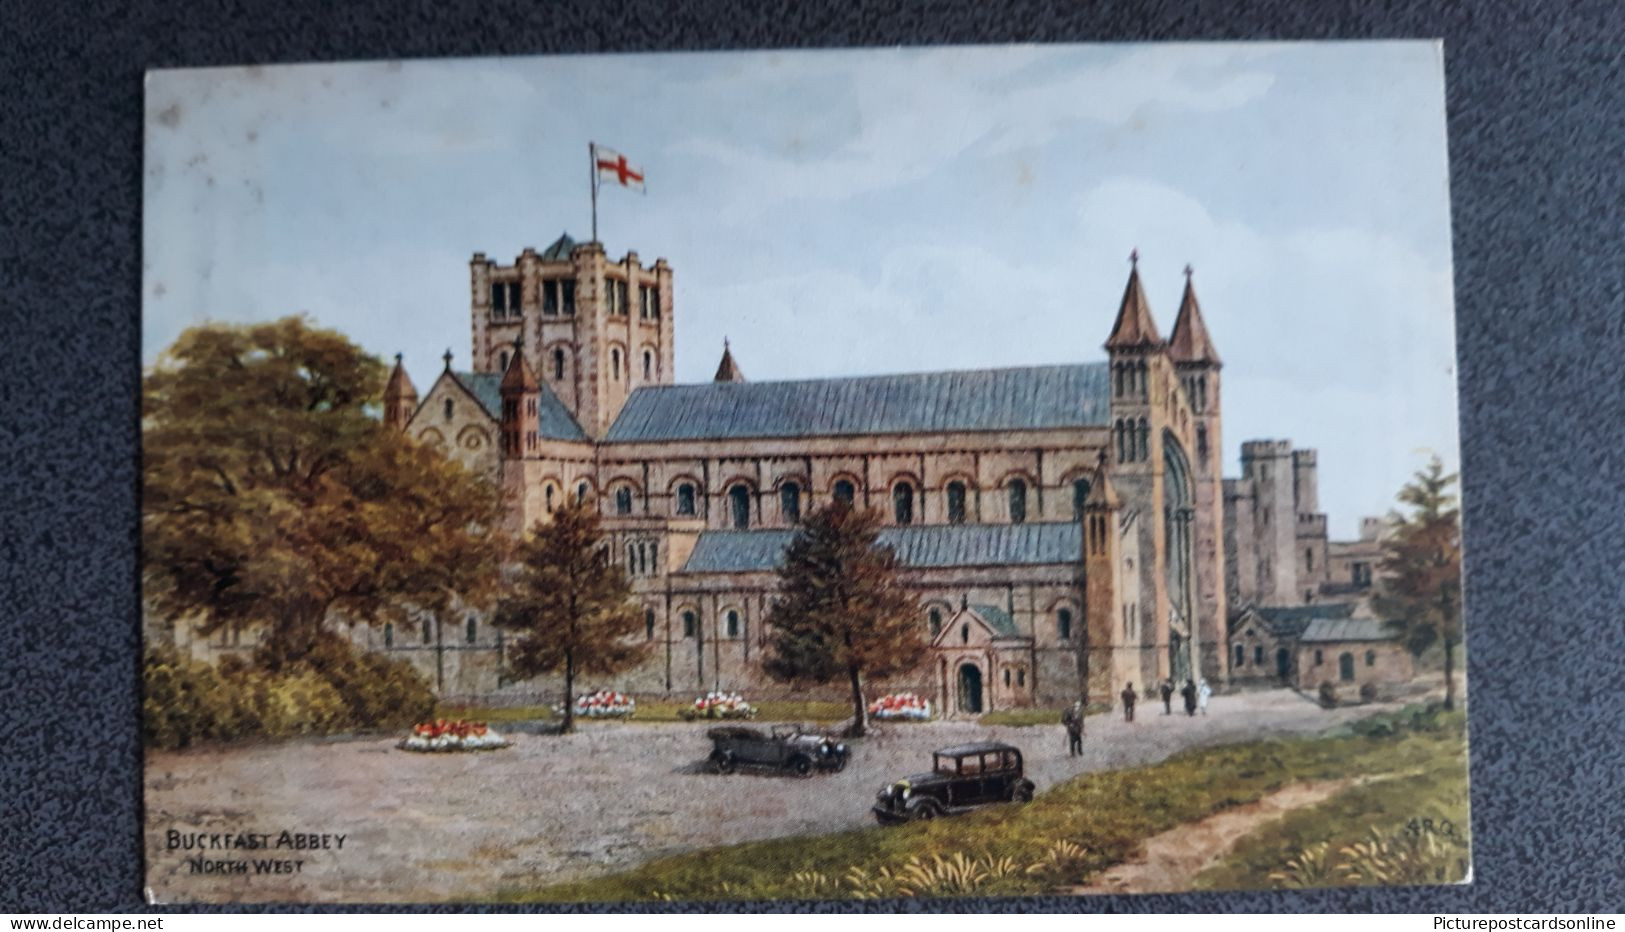 BUCKFAST ABBEY NORTH WEST OLD COLOUR ART POSTCARD ARTIST SIGNED A. R. QUINTON ARQ SALMON NOT NUMBERED? - Quinton, AR